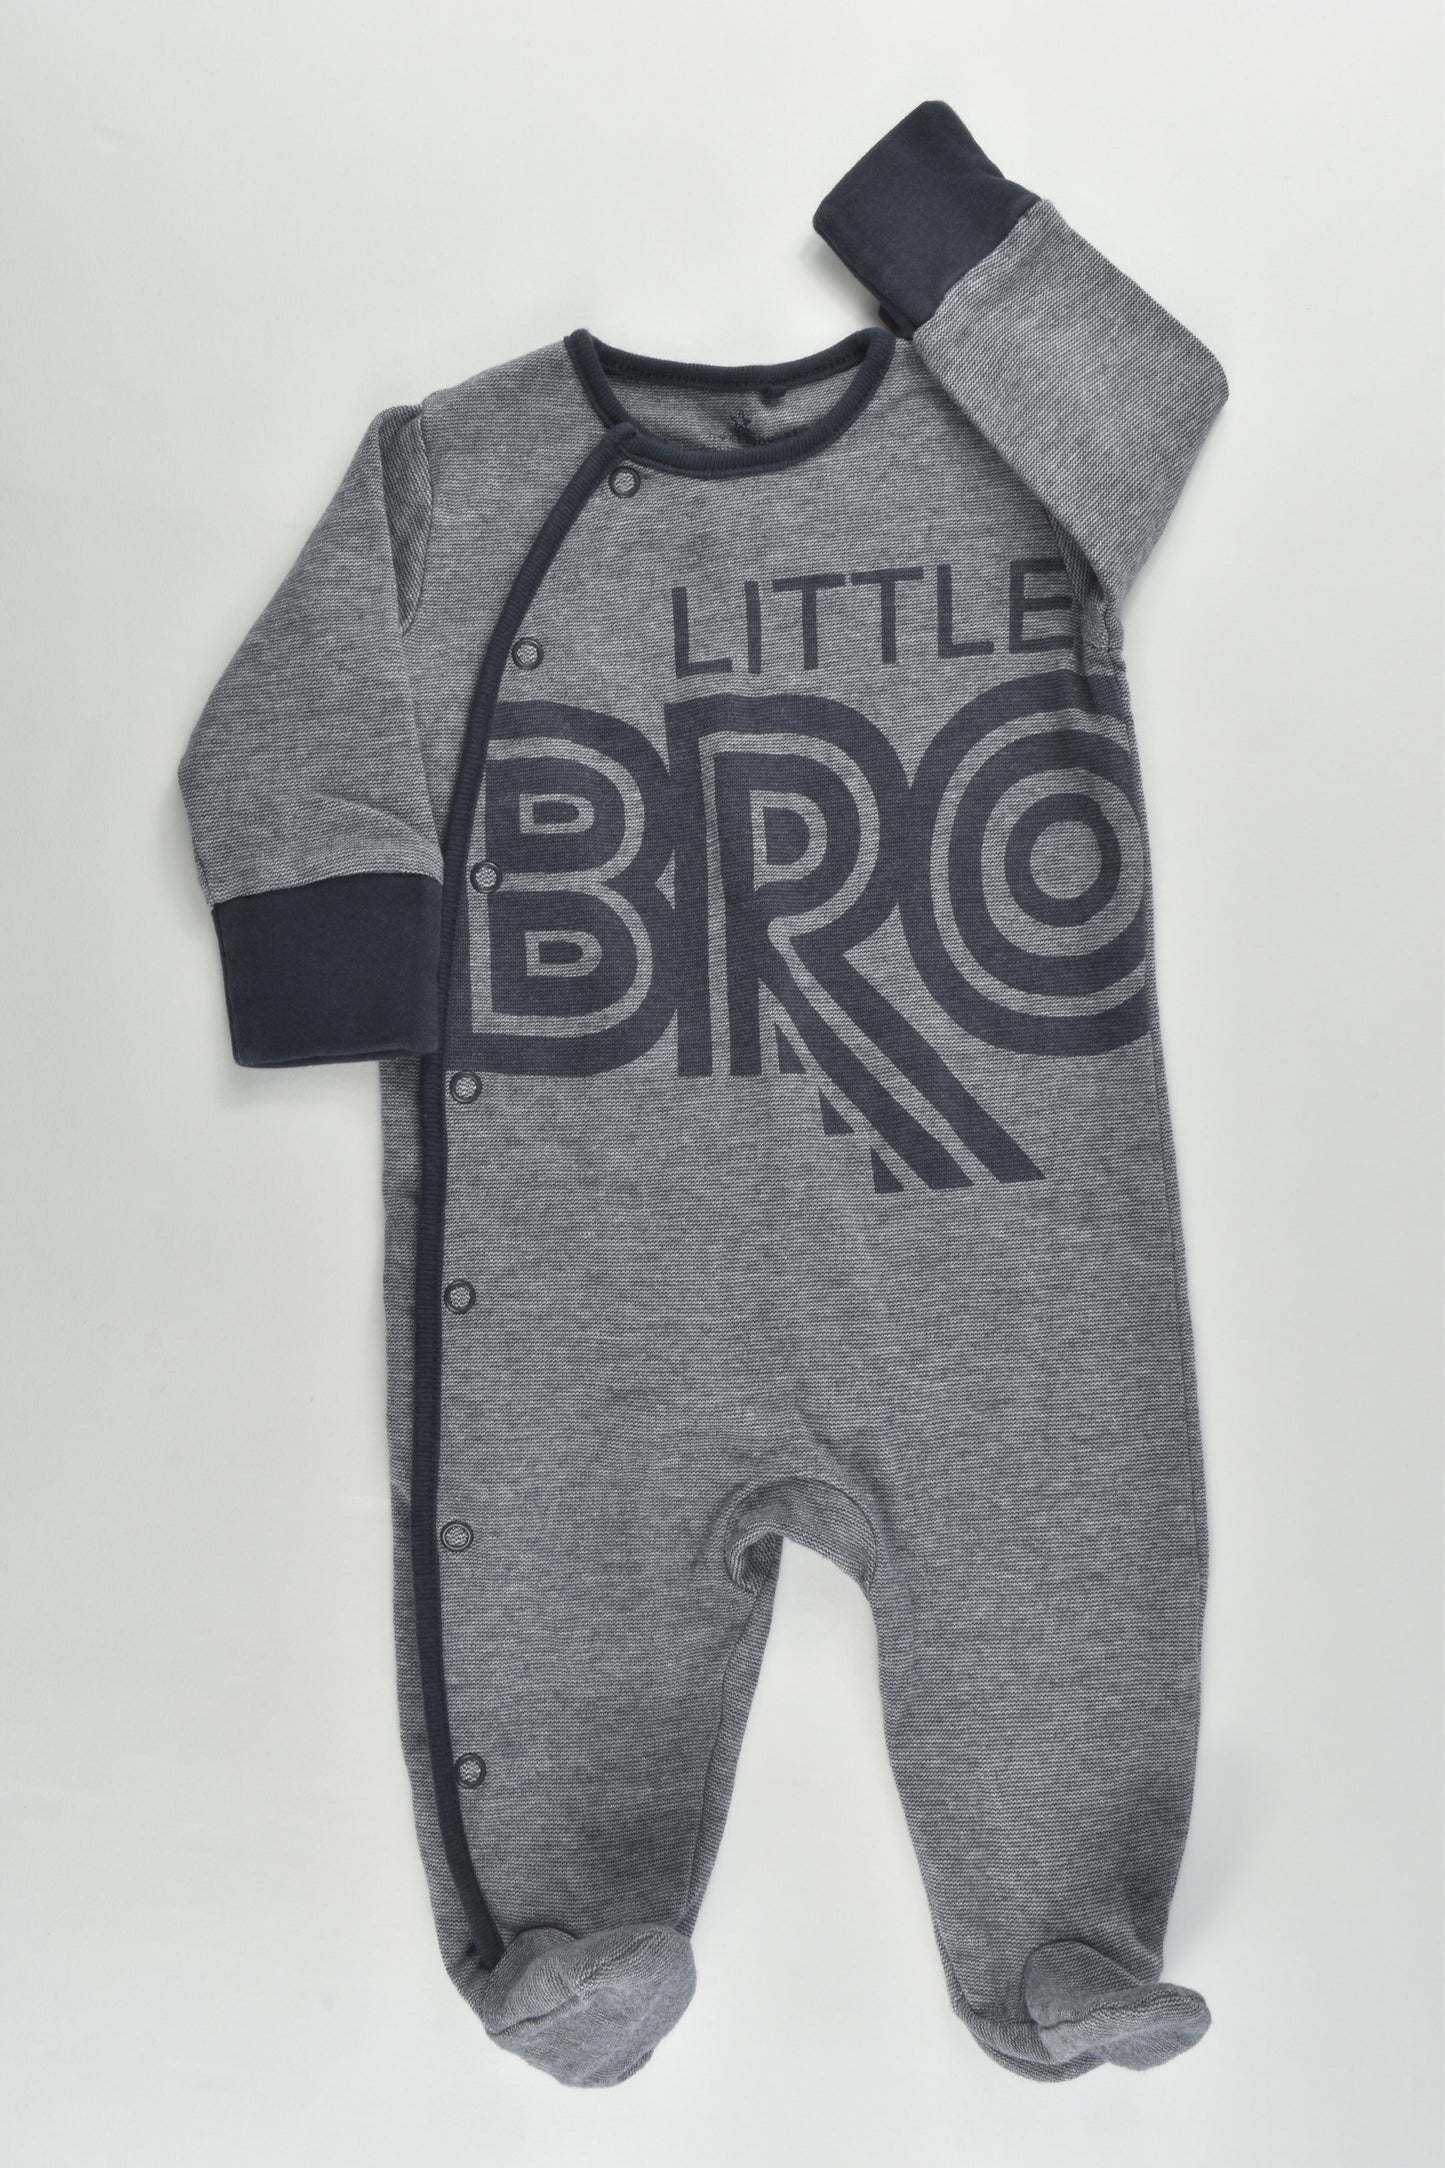 Next Size 000 (Up to 3 months) 'Little Bro' Footed Romper